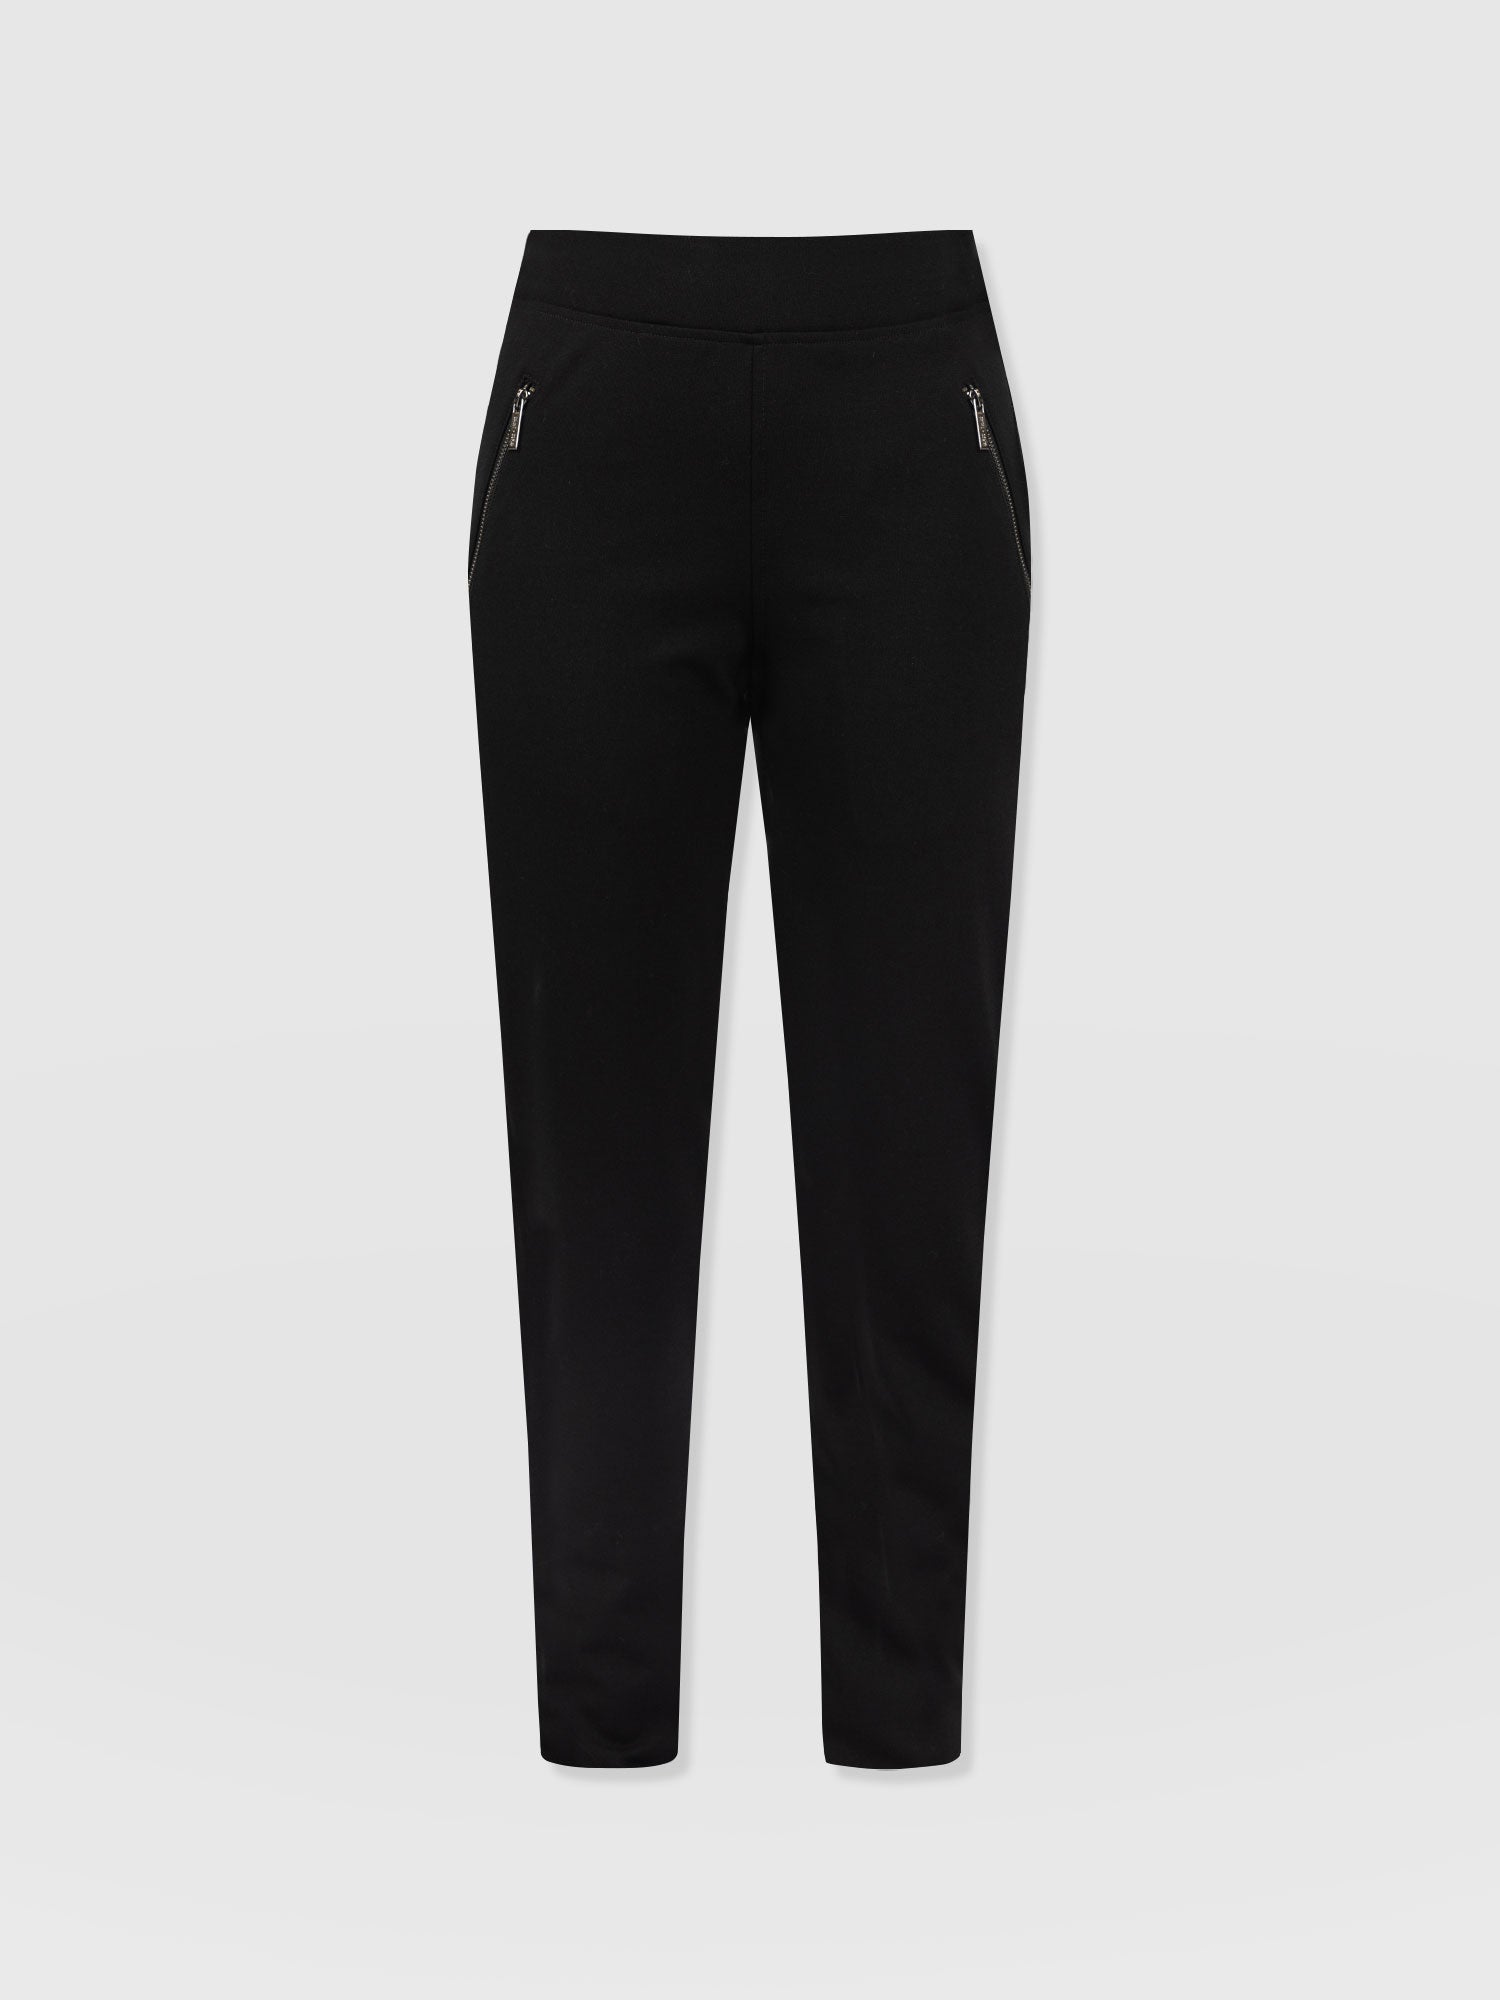 Investments the 5th AVE fit Side Zip Slim Leg Pants | Dillard's